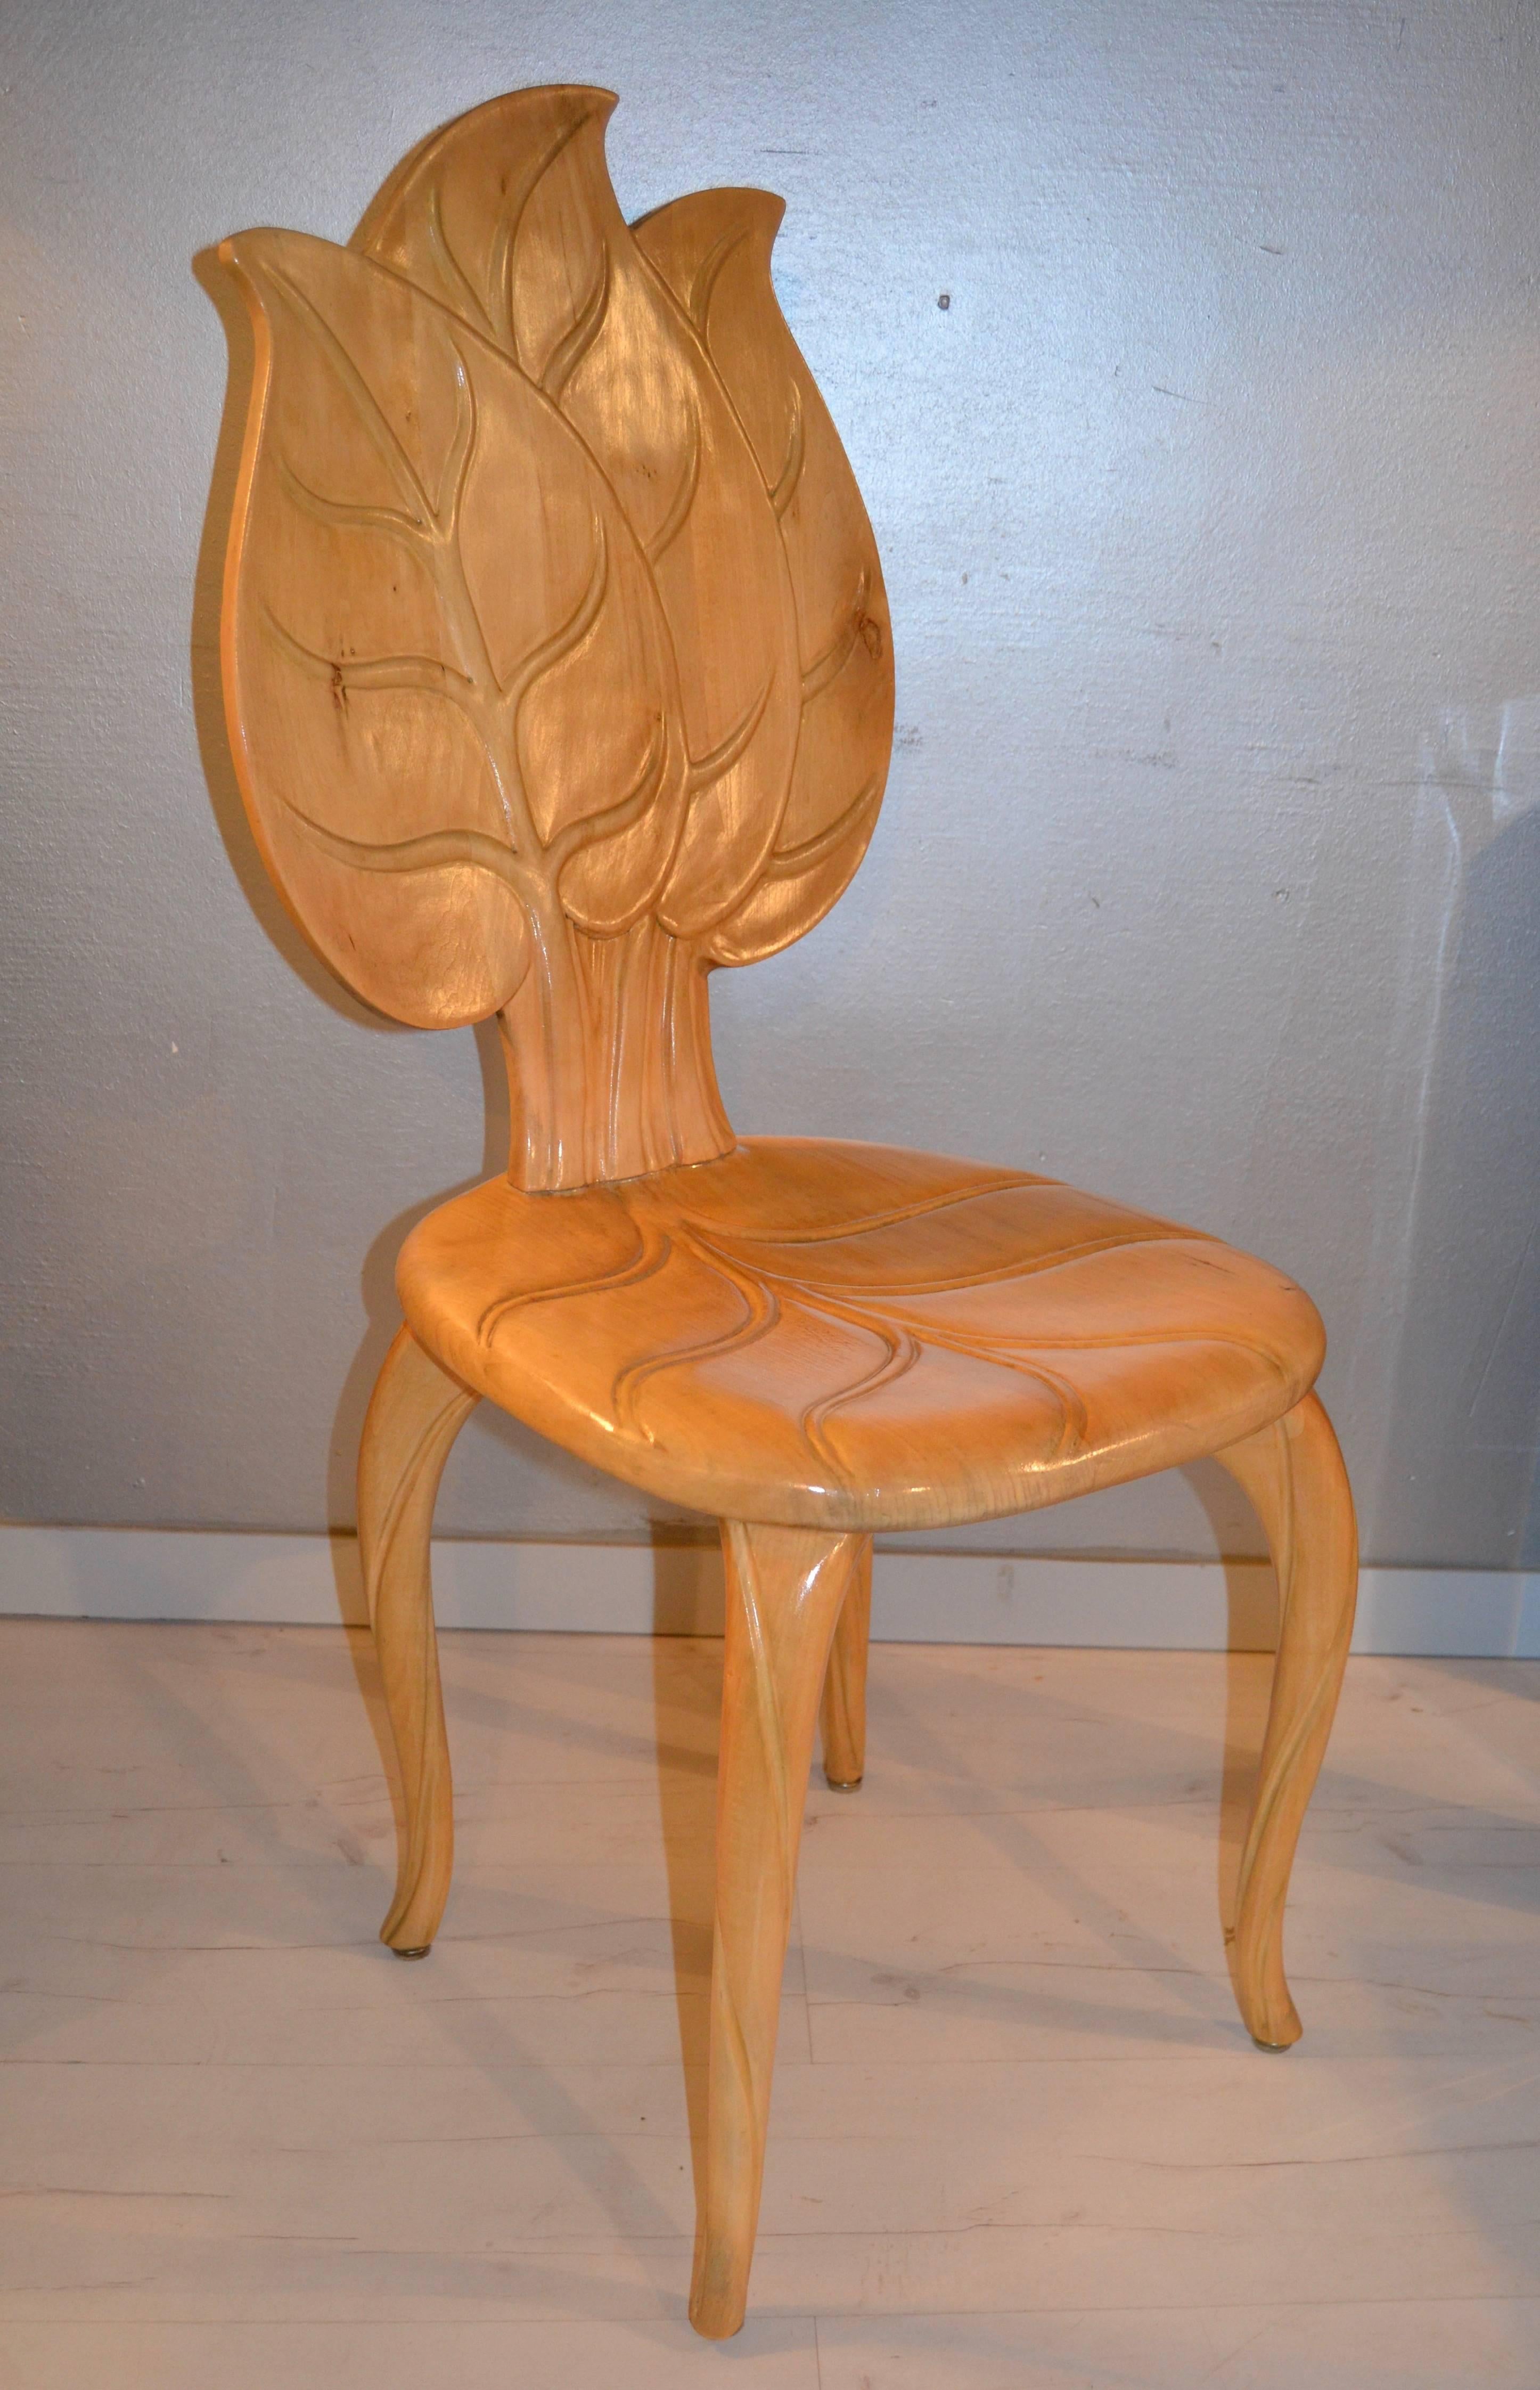 1970s hand-carved wooden leaf chair by the Italian small Botega Bartolozzi & Maiolli.
Impressive quality of work in small production at Florence, Italy, circa 1970.
Great vintage condition.
Four chairs are available.